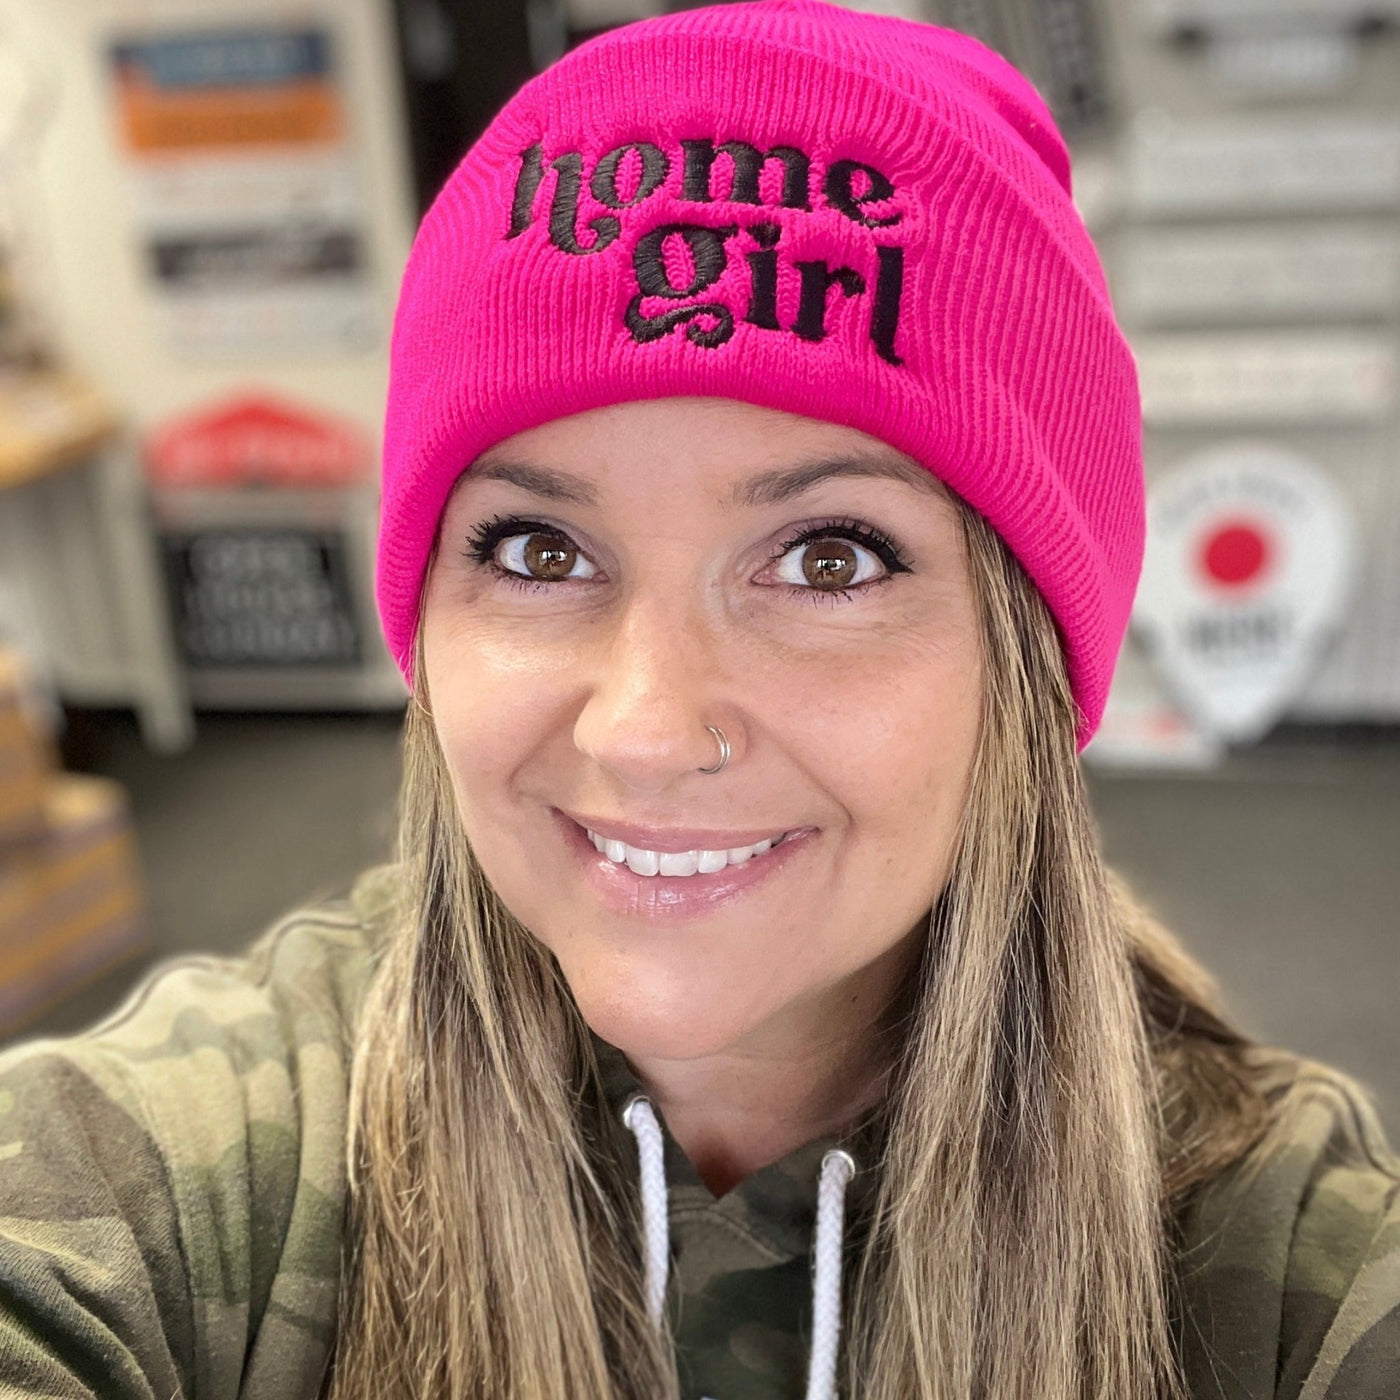 Beanie - Home Girl - Neon Pink - All Things Real Estate